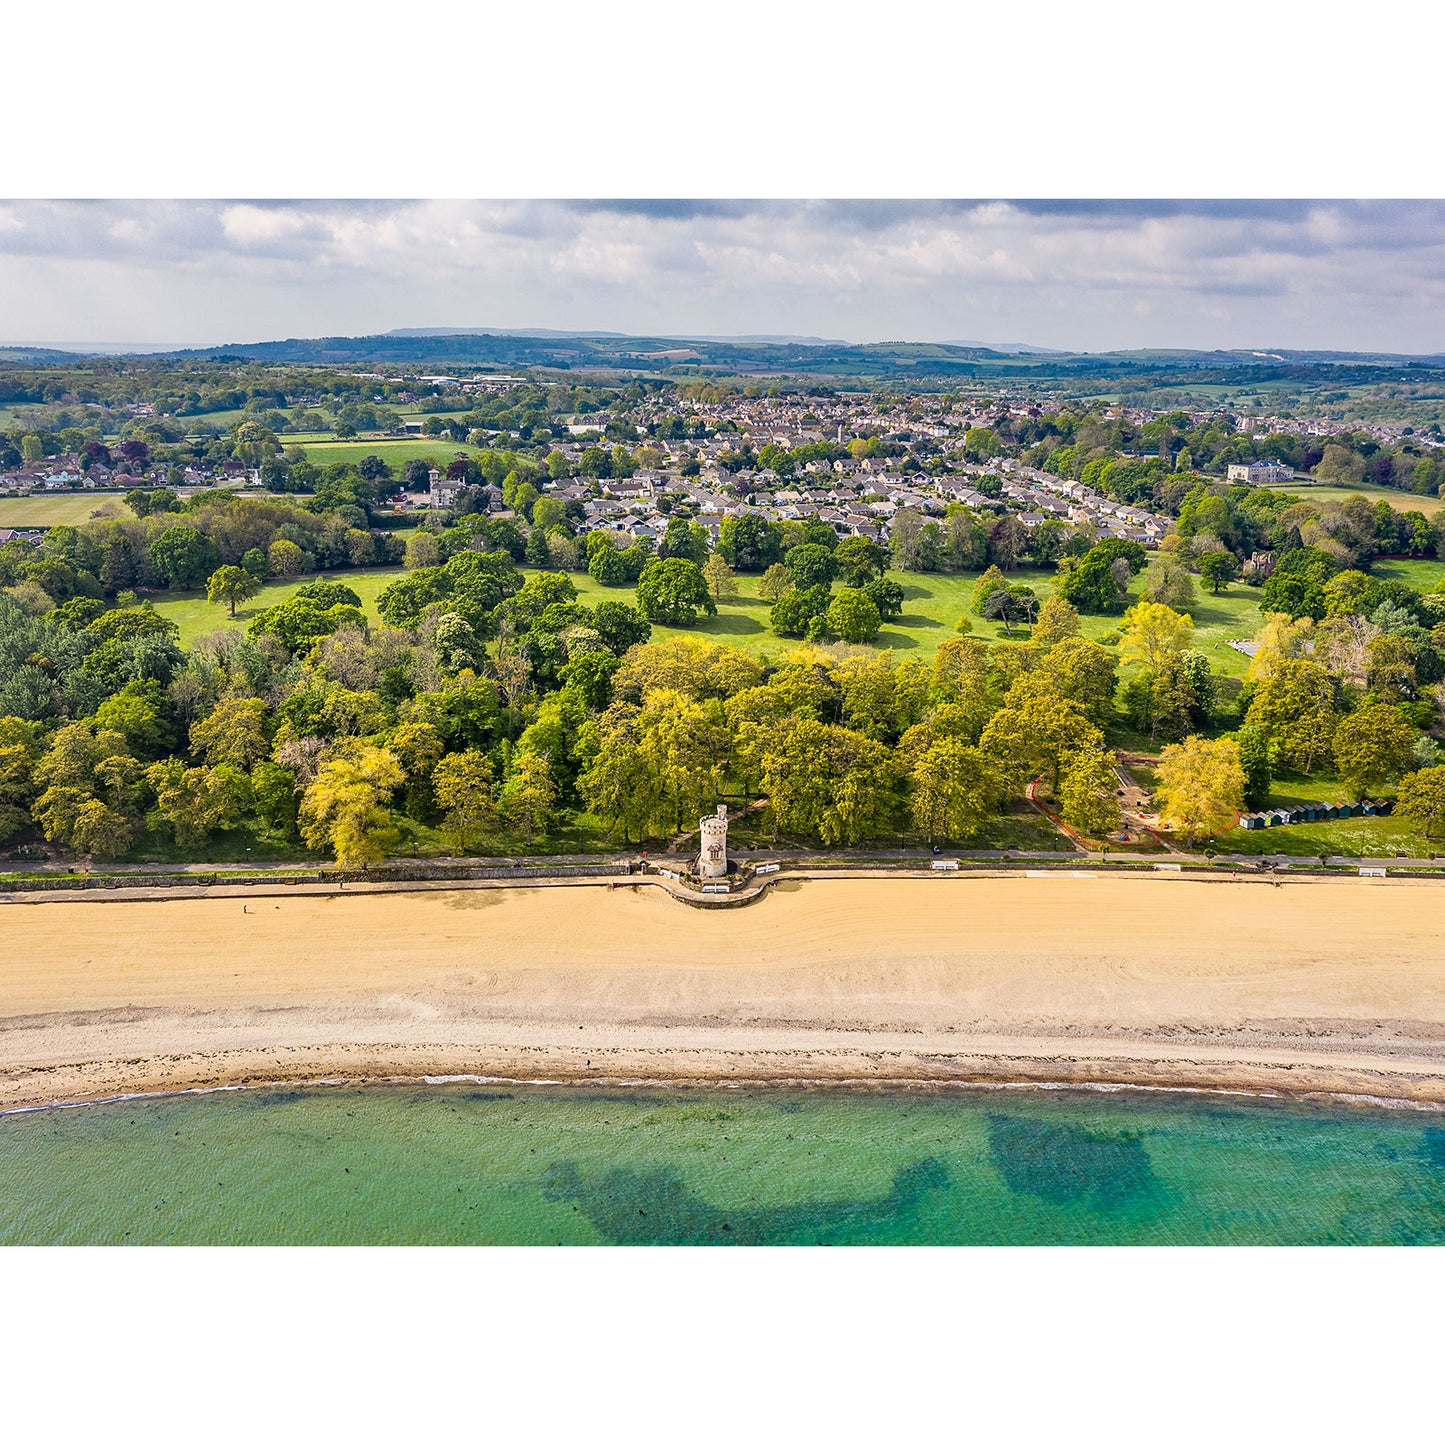 Aerial view of a coastal town on the Isle of Wight with Appley Tower near the beach, surrounded by greenery, captured by Available Light Photography.